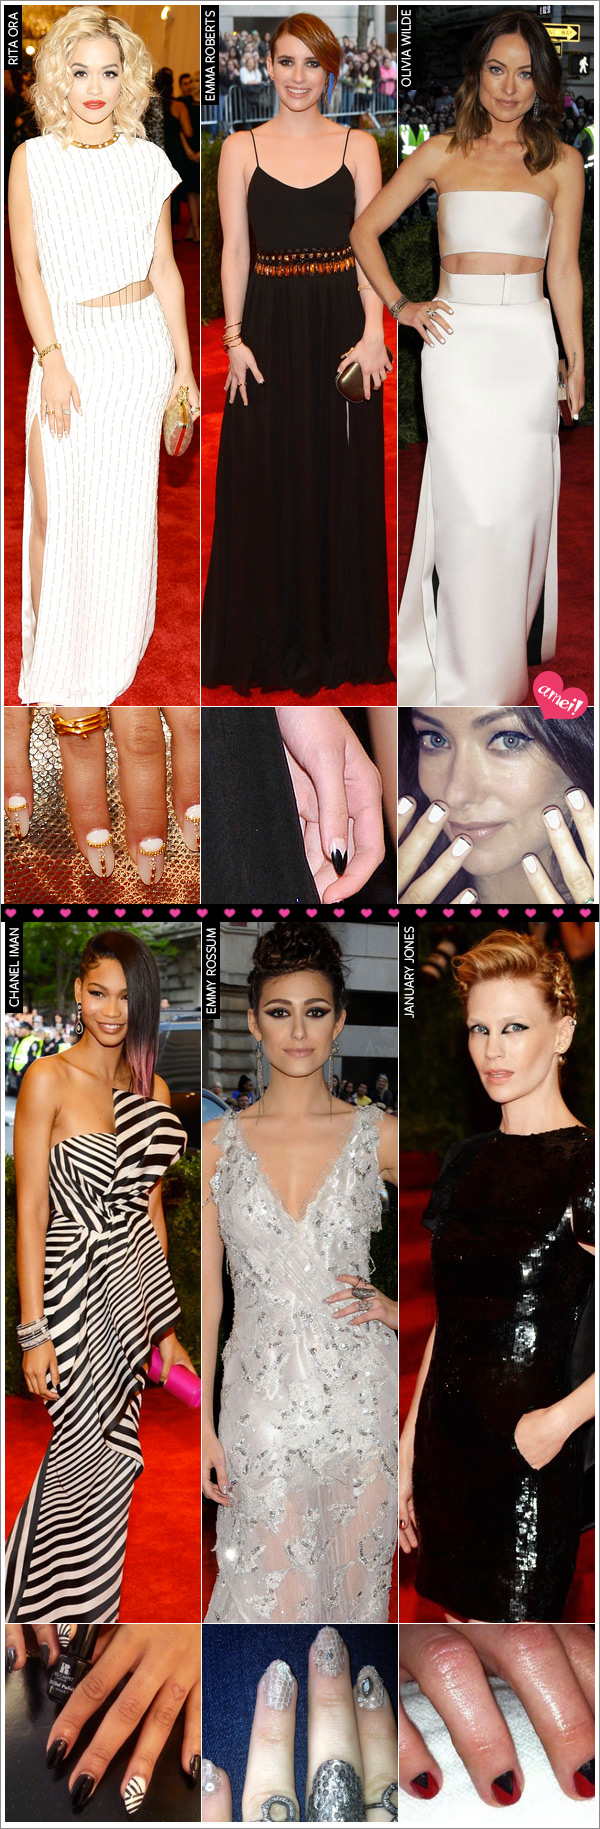 2met-gala-2013-unhas-manicure-nails